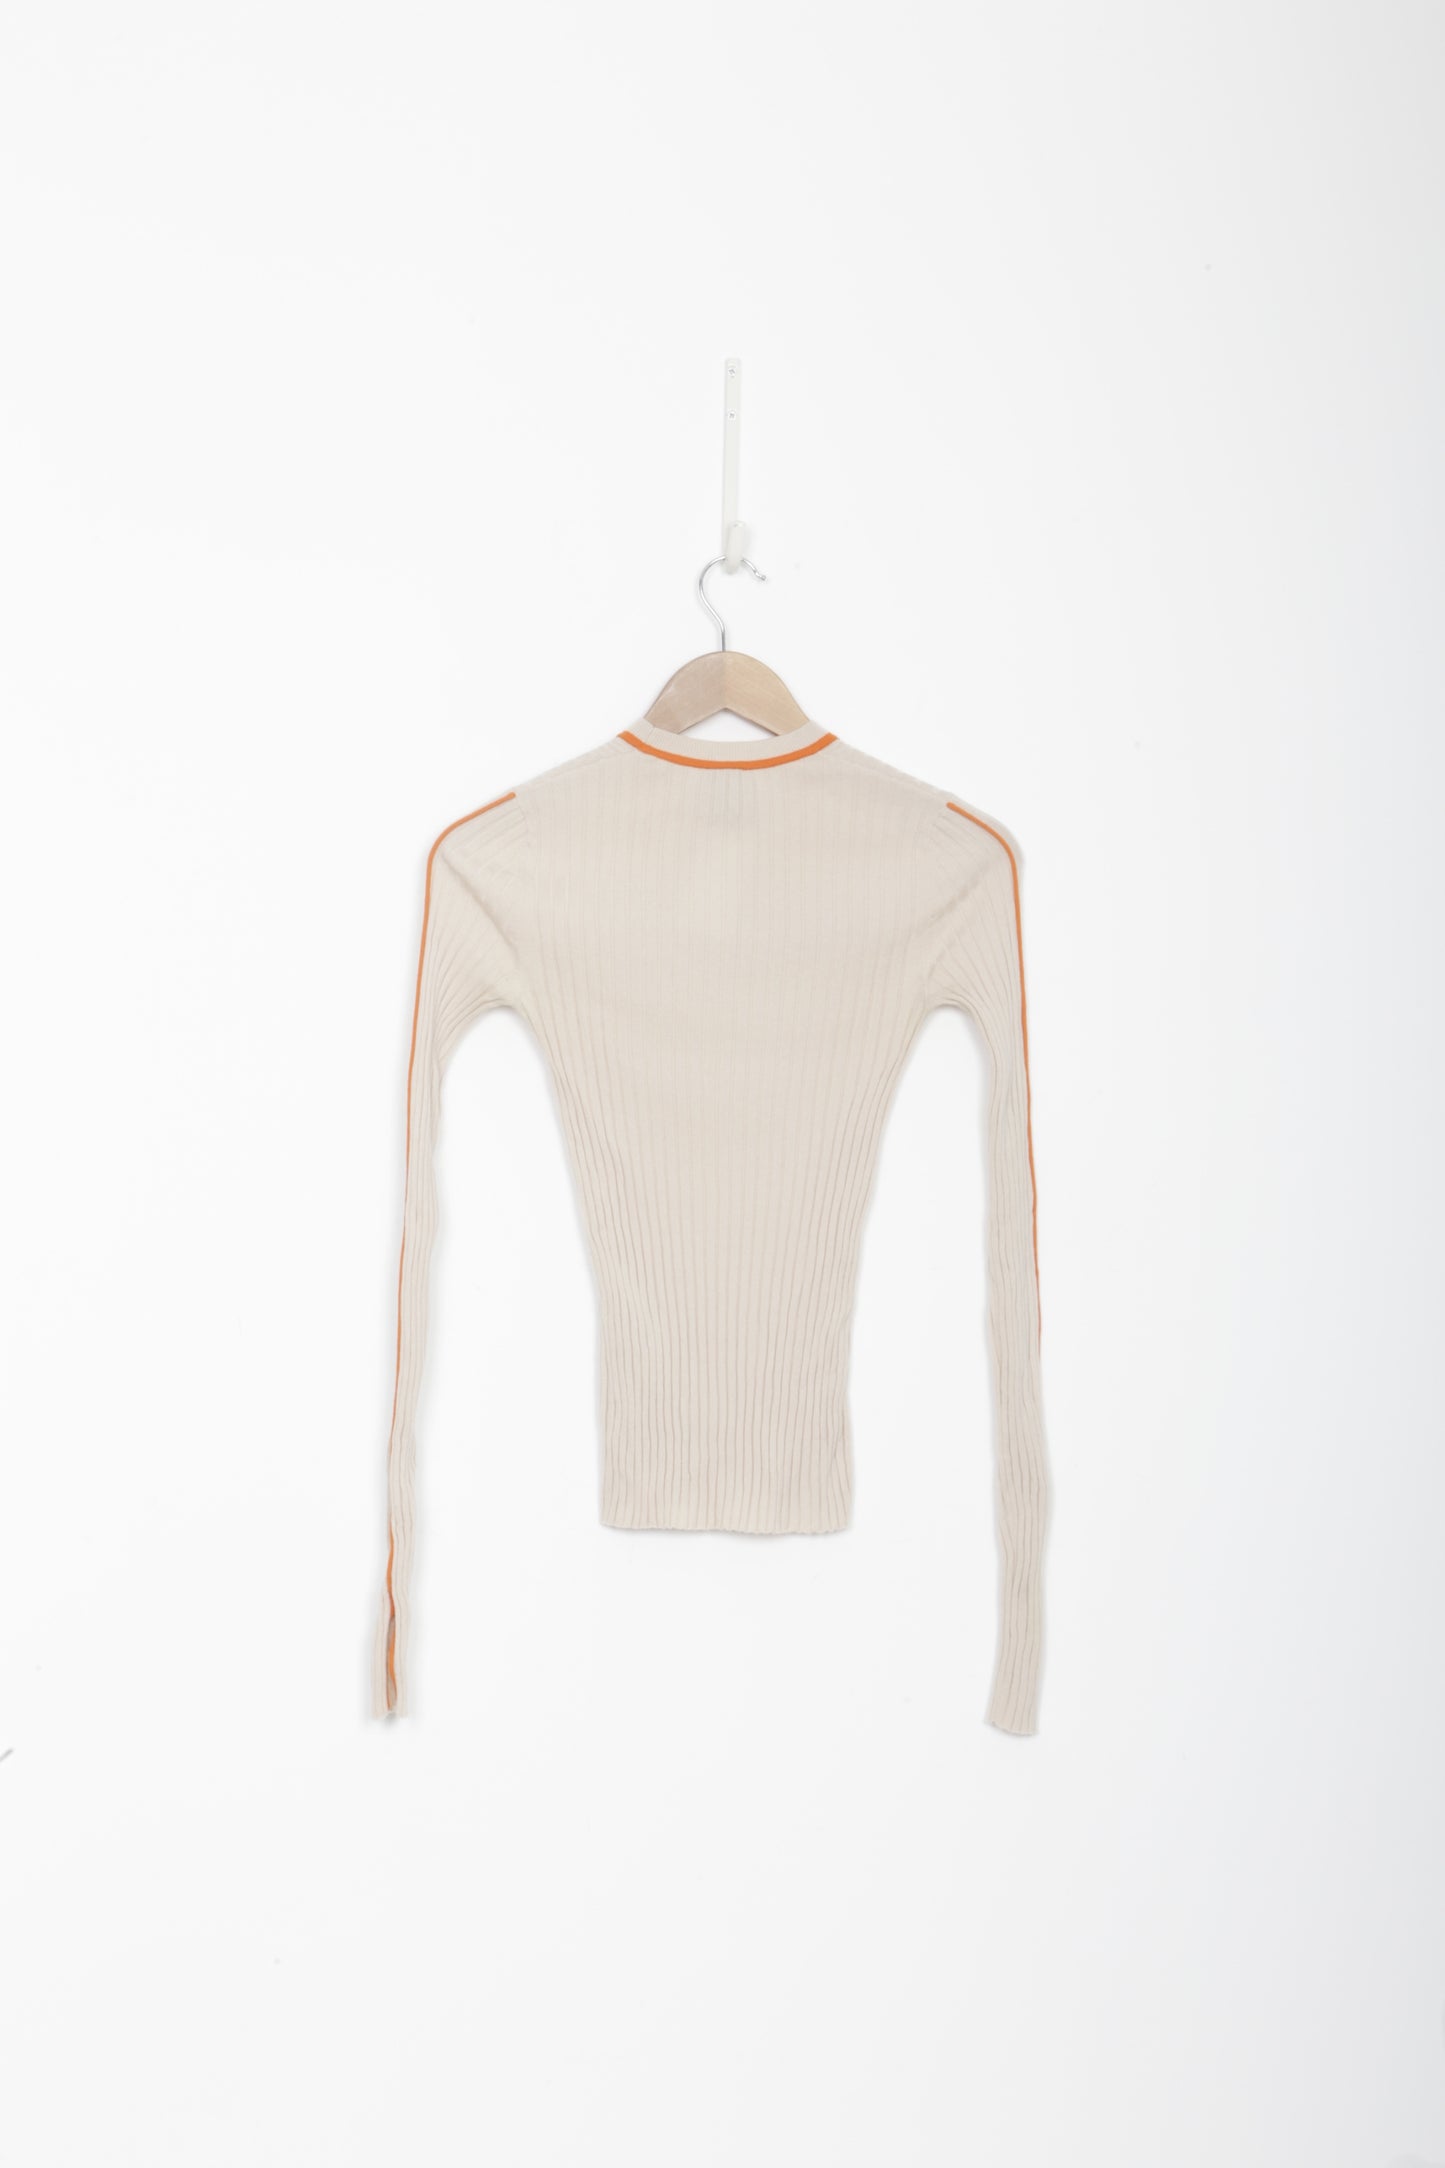 P.E Nation Womens Beige Top Size XS